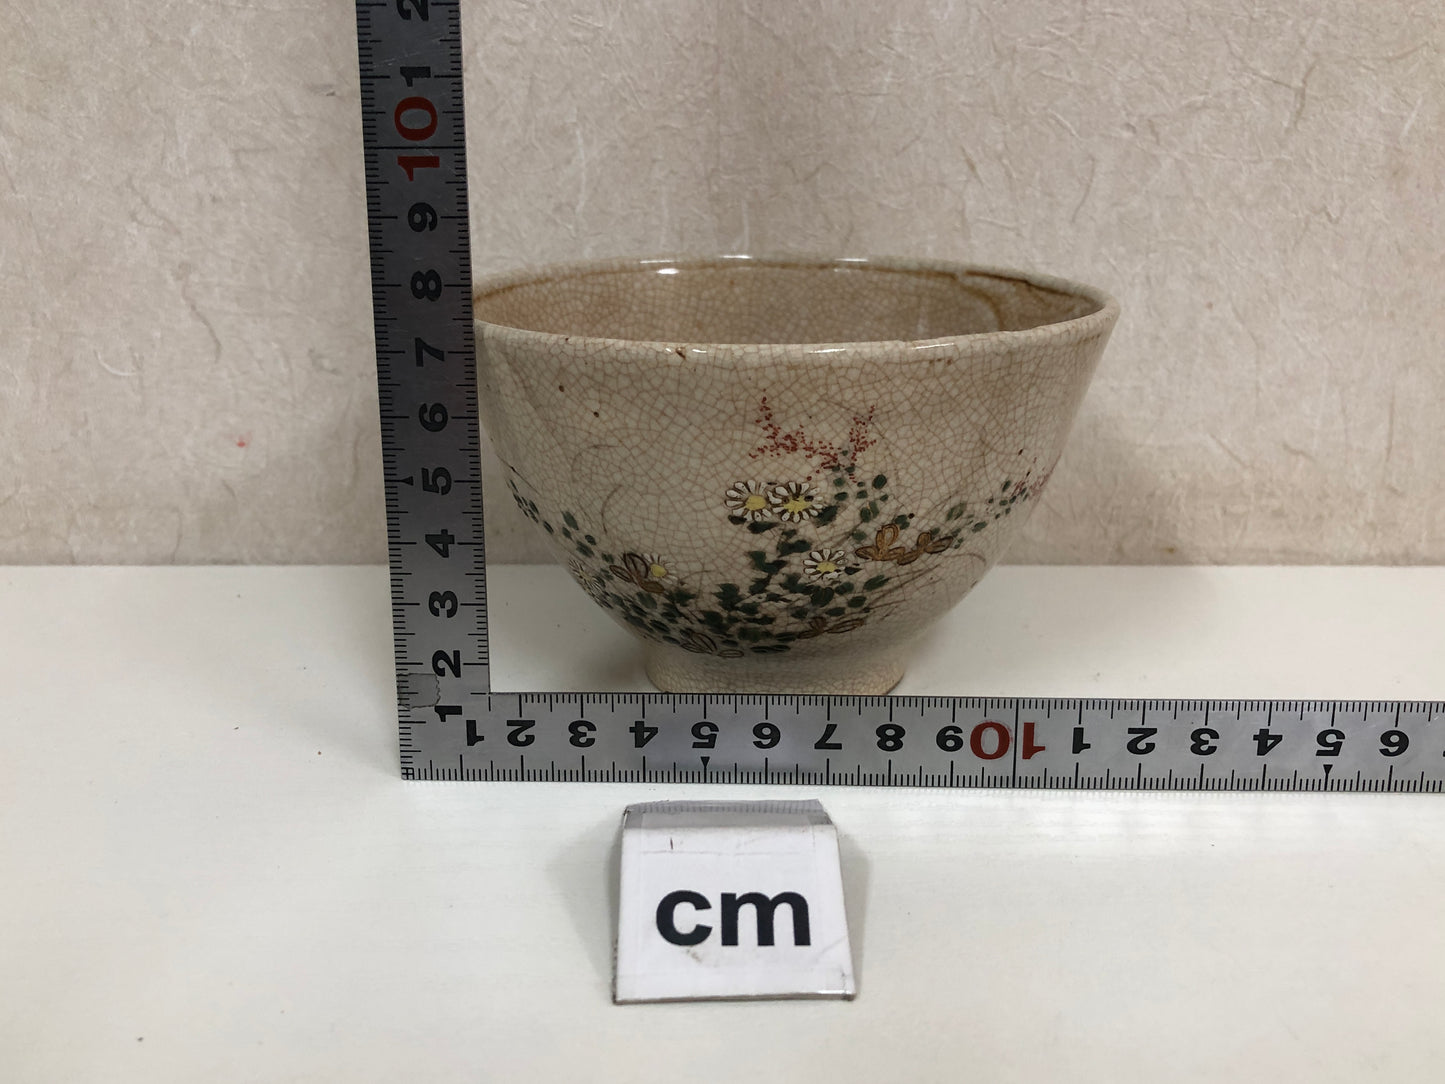 Y3915 CHAWAN Satsuma-ware flower Japan antique tea ceremony bowl cup pottery